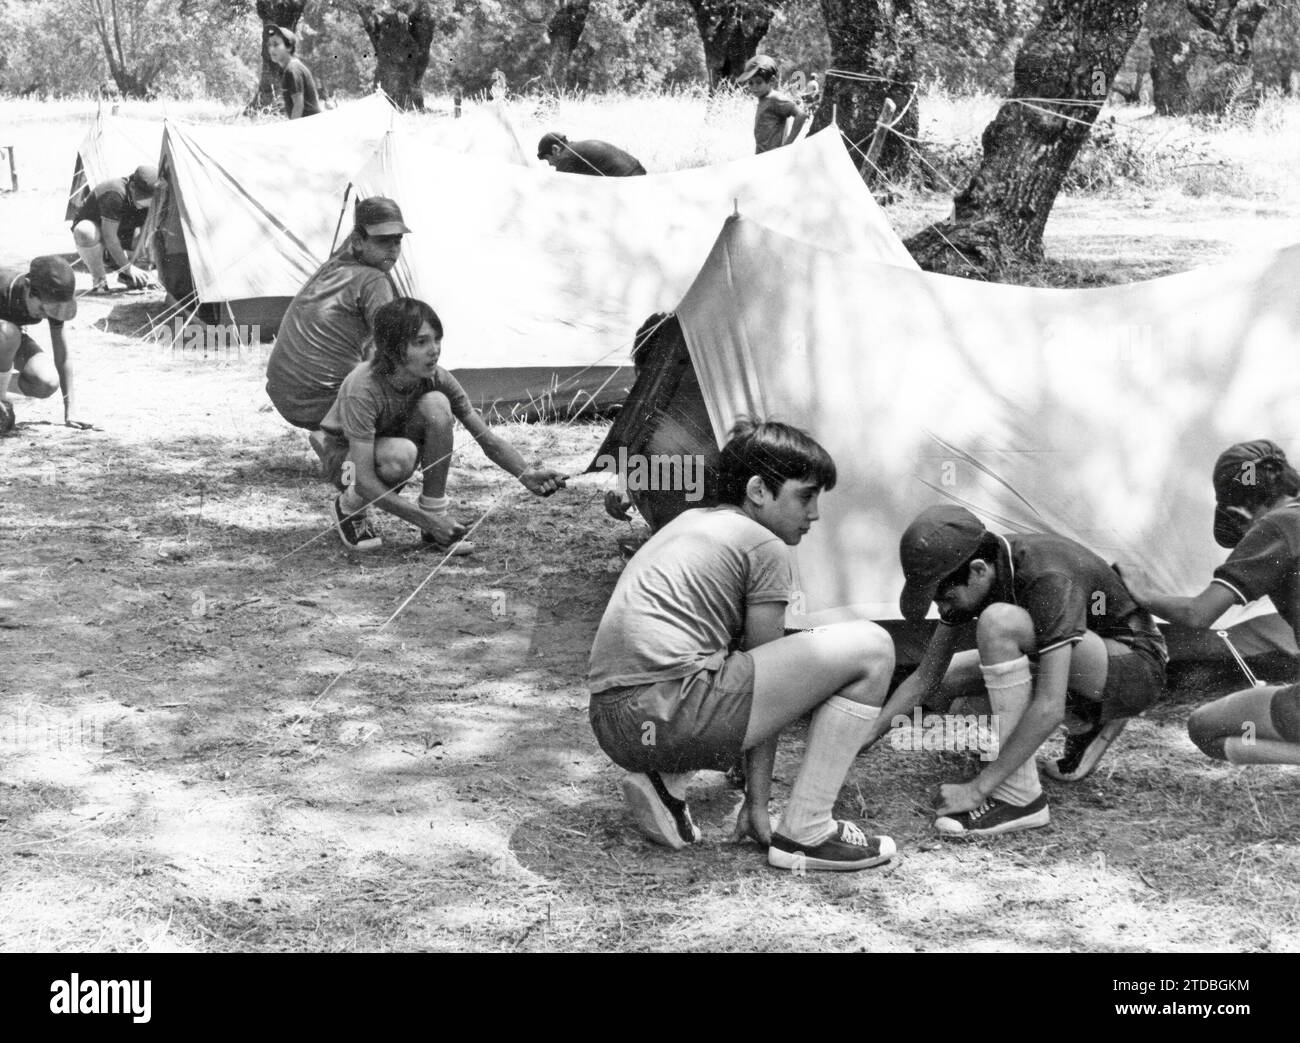 01/01/1975. Some Children Set Up Their Tents at a Summer Camp. Credit: Album / Archivo ABC / D. Cubillo Stock Photo